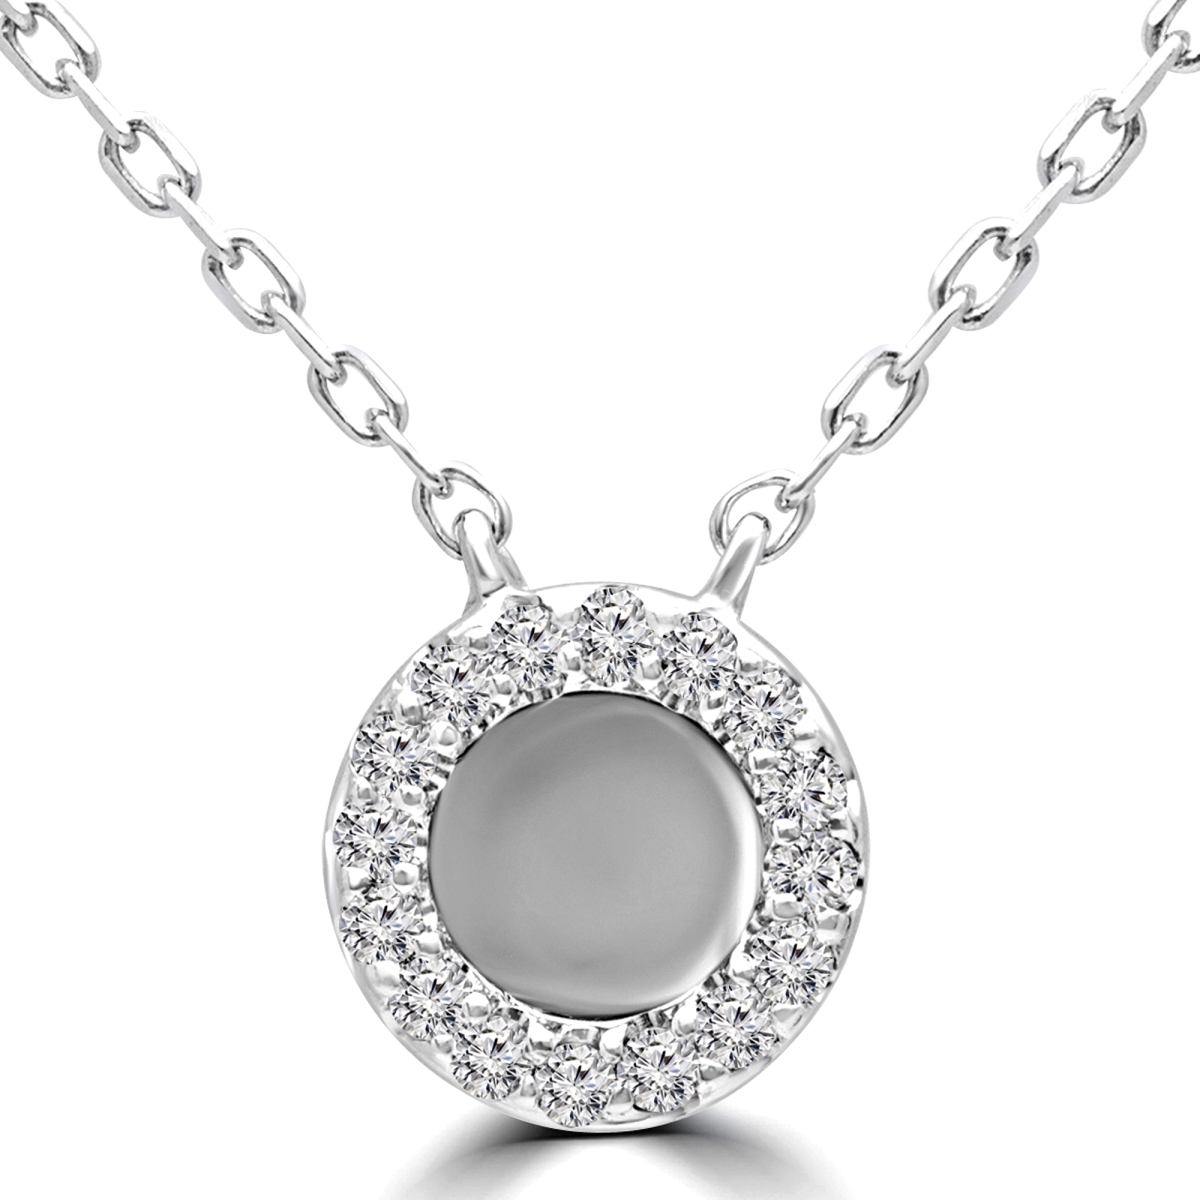 Mdr170164 0.1 Ctw Round Diamond Fancy Pendant Necklace In 14k